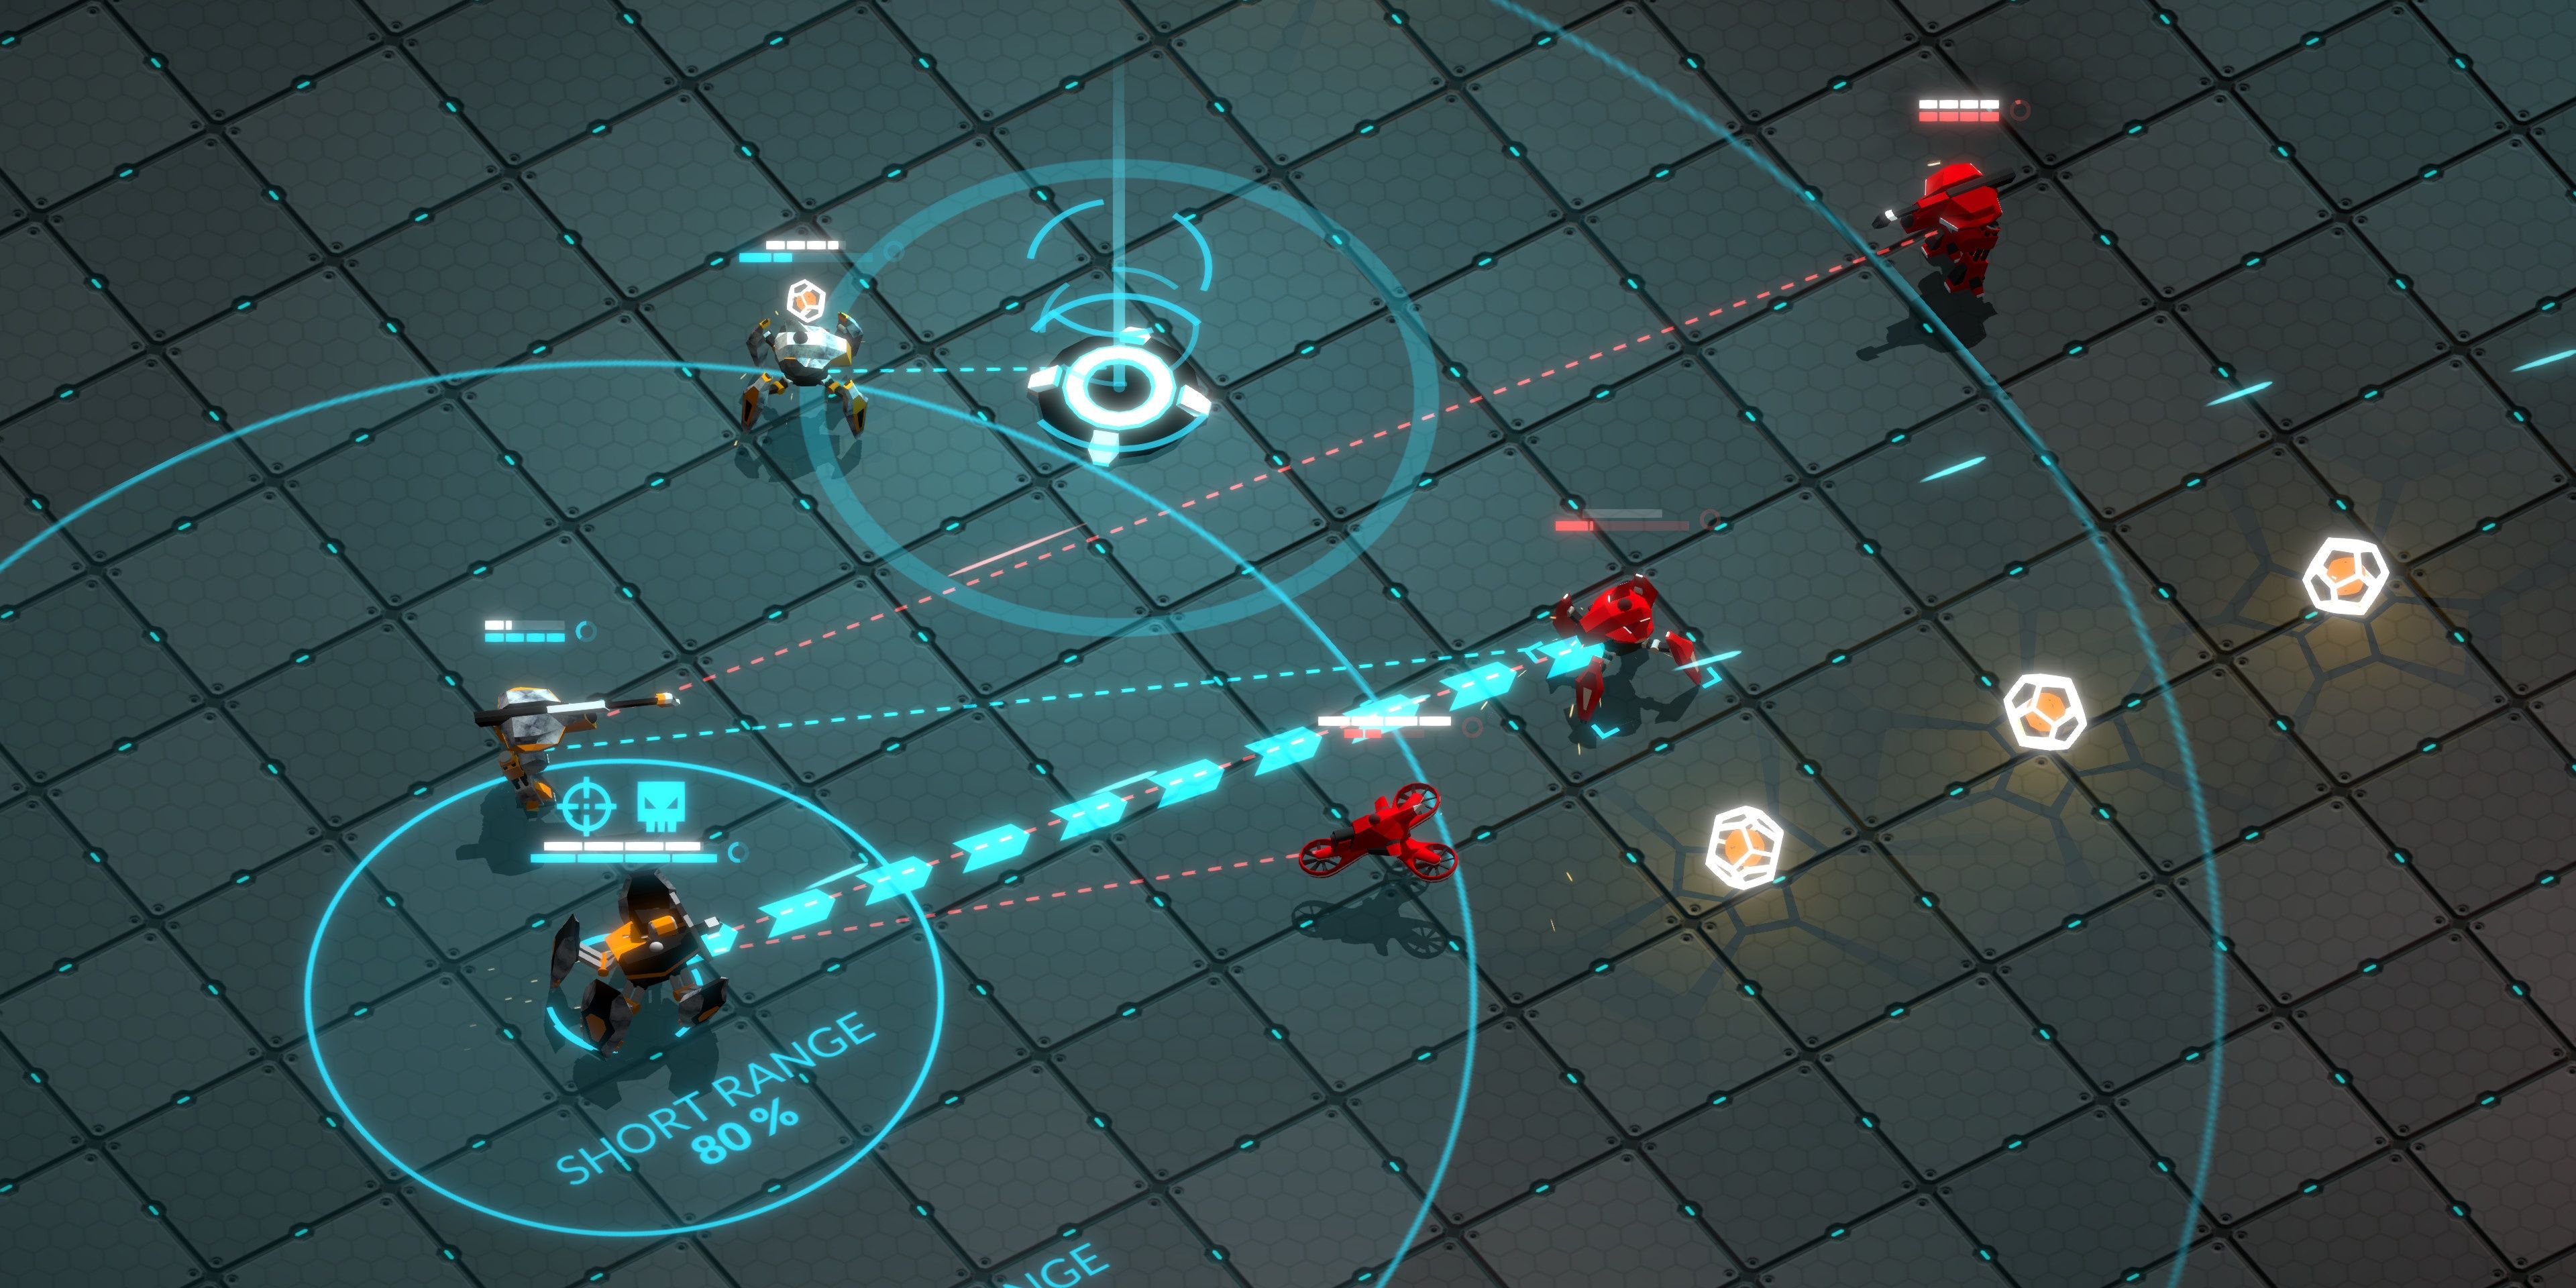 Overhead shot of several robots locked in combat. Image credit: whatsonsteam.com